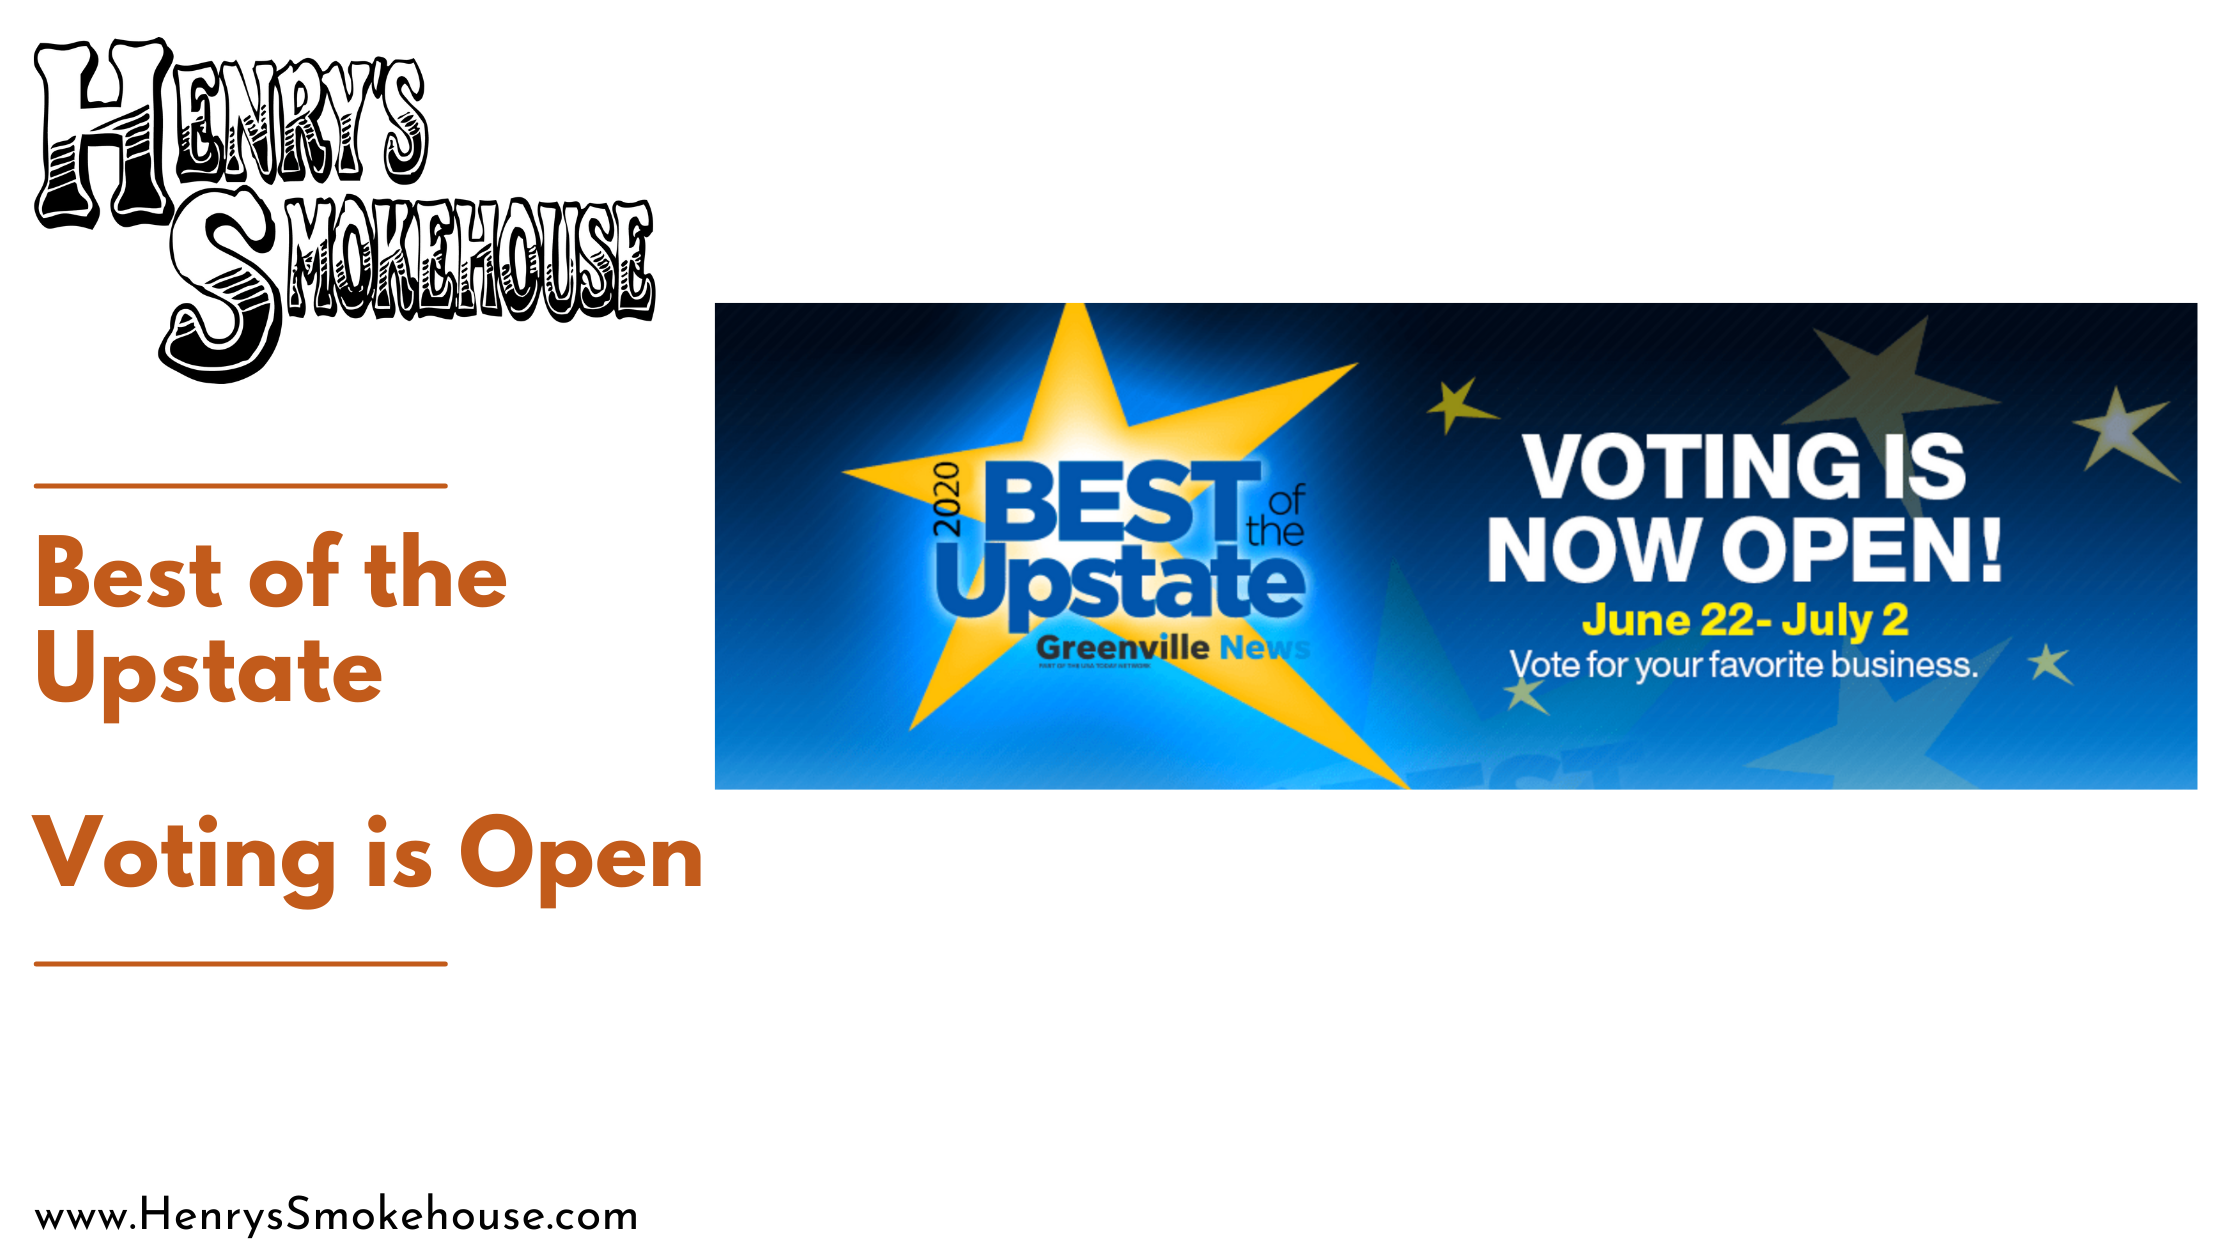 Best of the Upstate – Voting is Open